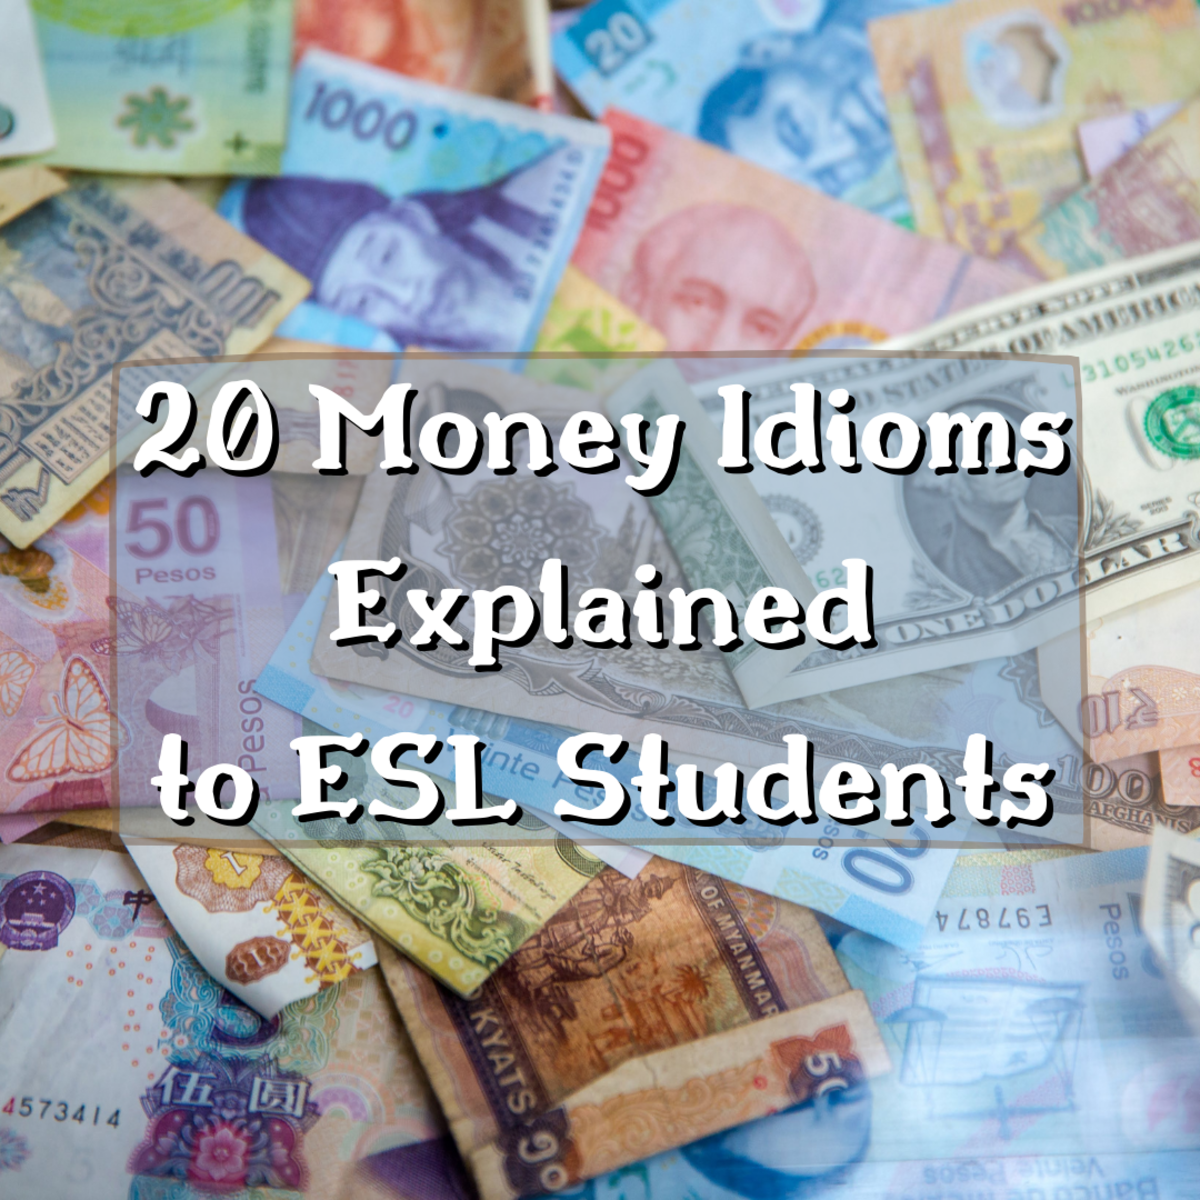 20 Money Idioms Explained to ESL Students